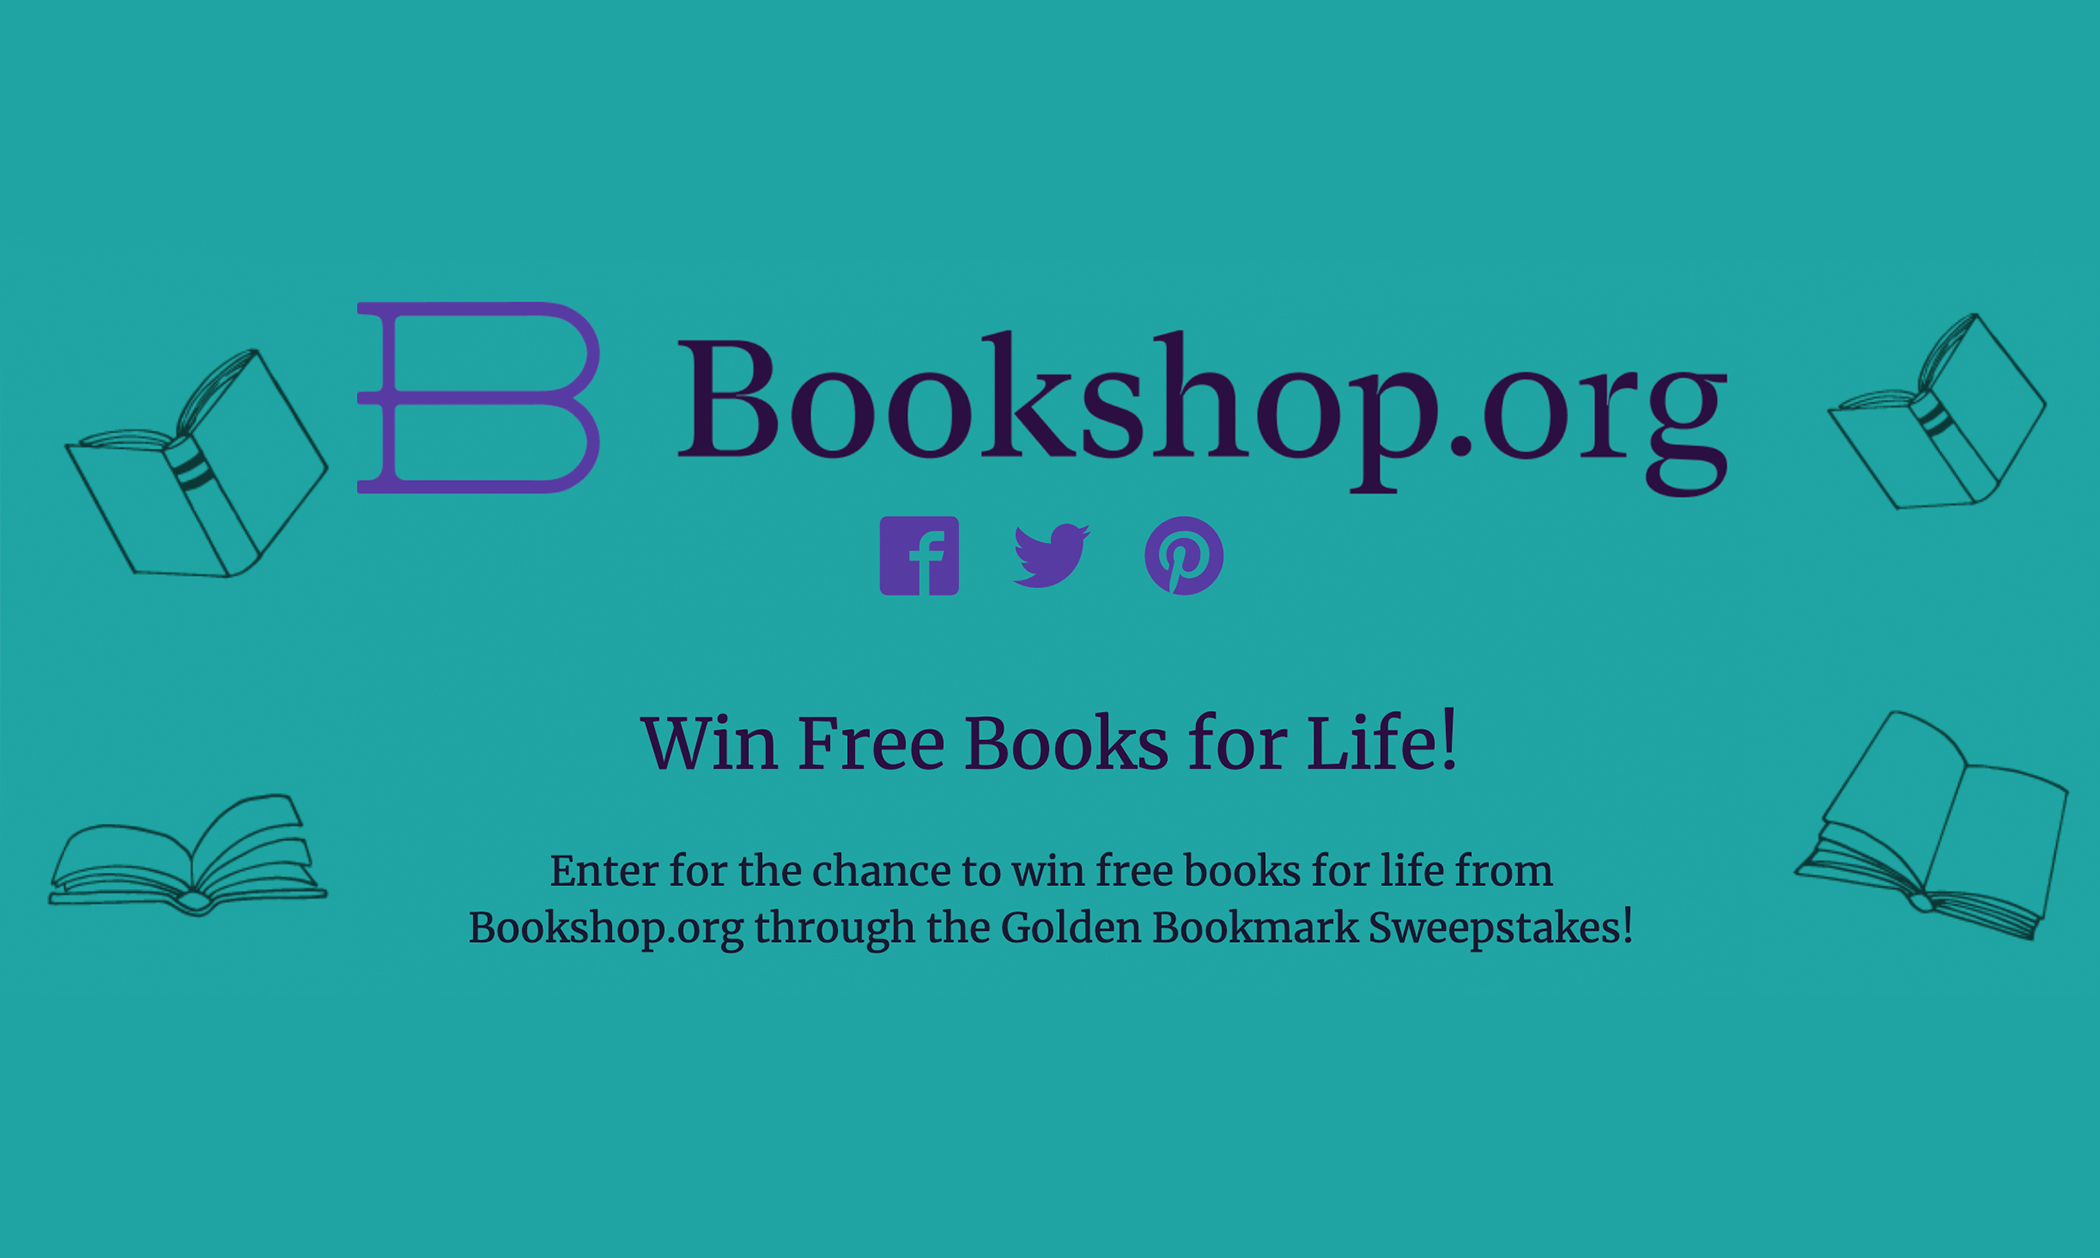 Enter for a Chance to Win Free Books for Life! – The Savvy Sampler